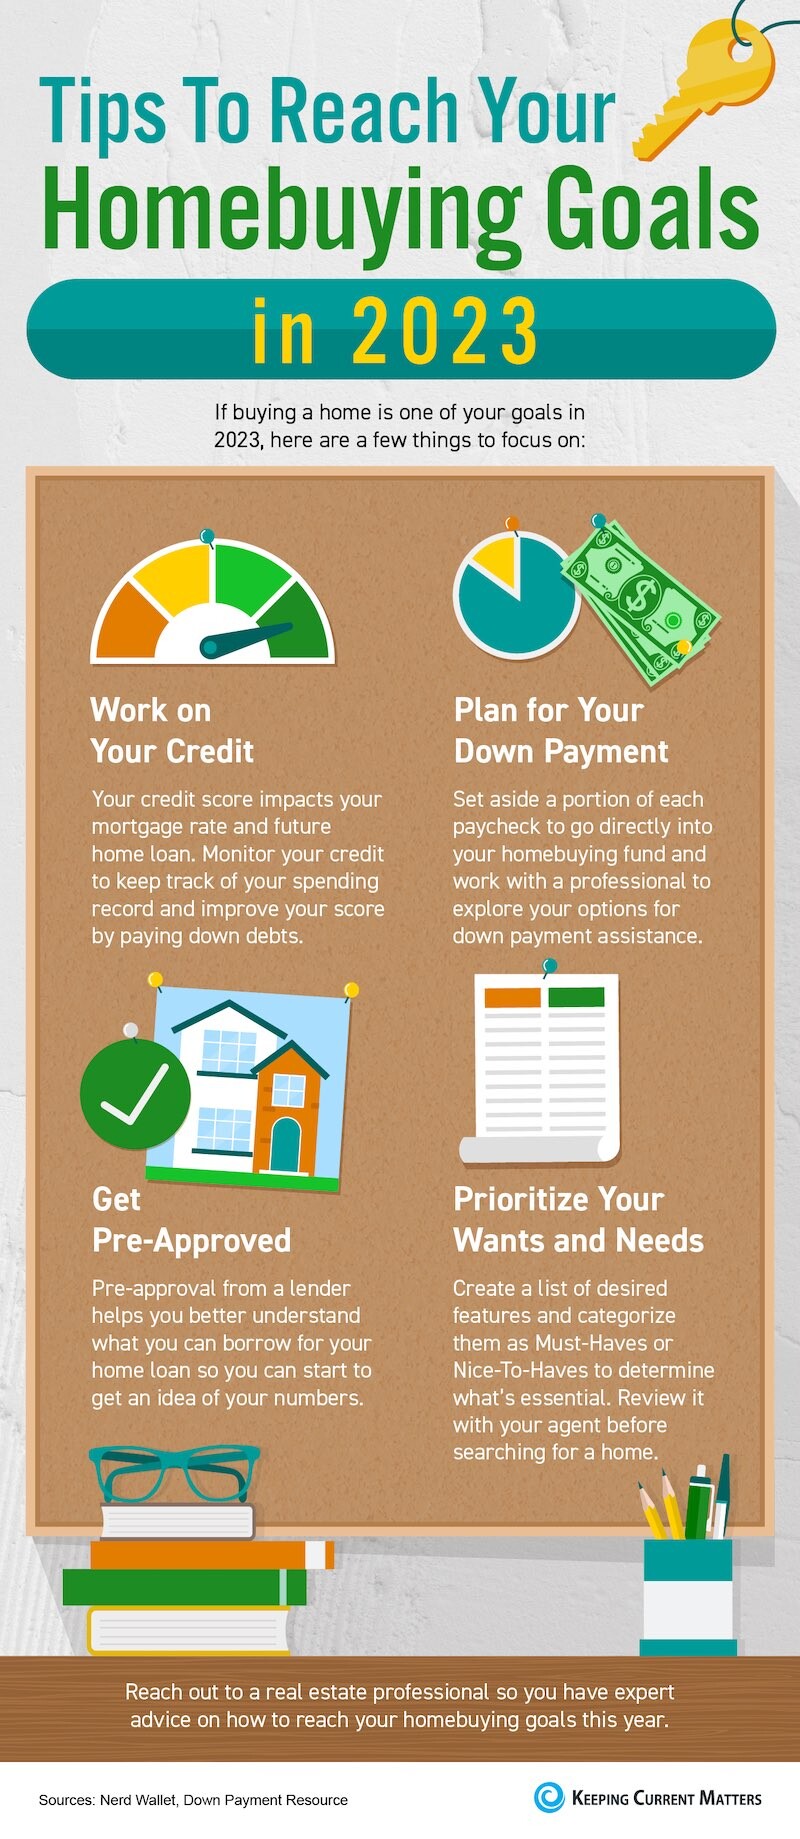  Tips-To-Reach-Your-Homebuying-Goals-in-2023-NM Tips To Reach Your Homebuying Goals in 2023 [INFOGRAPHIC]  